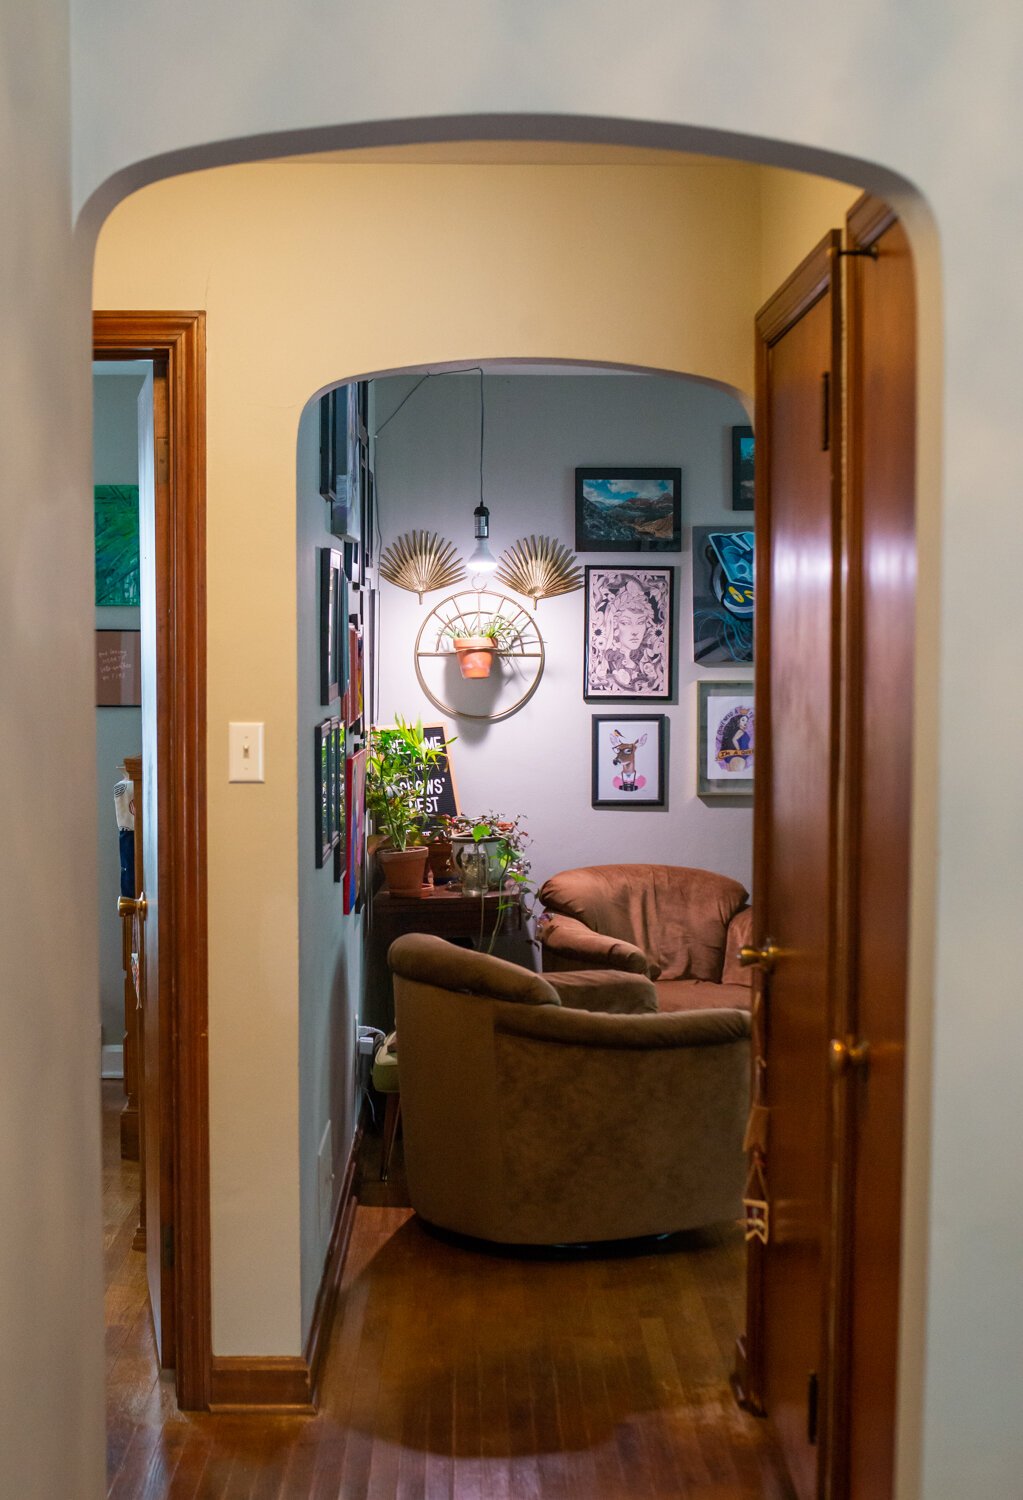 Rounded doorways are a feature at the home.